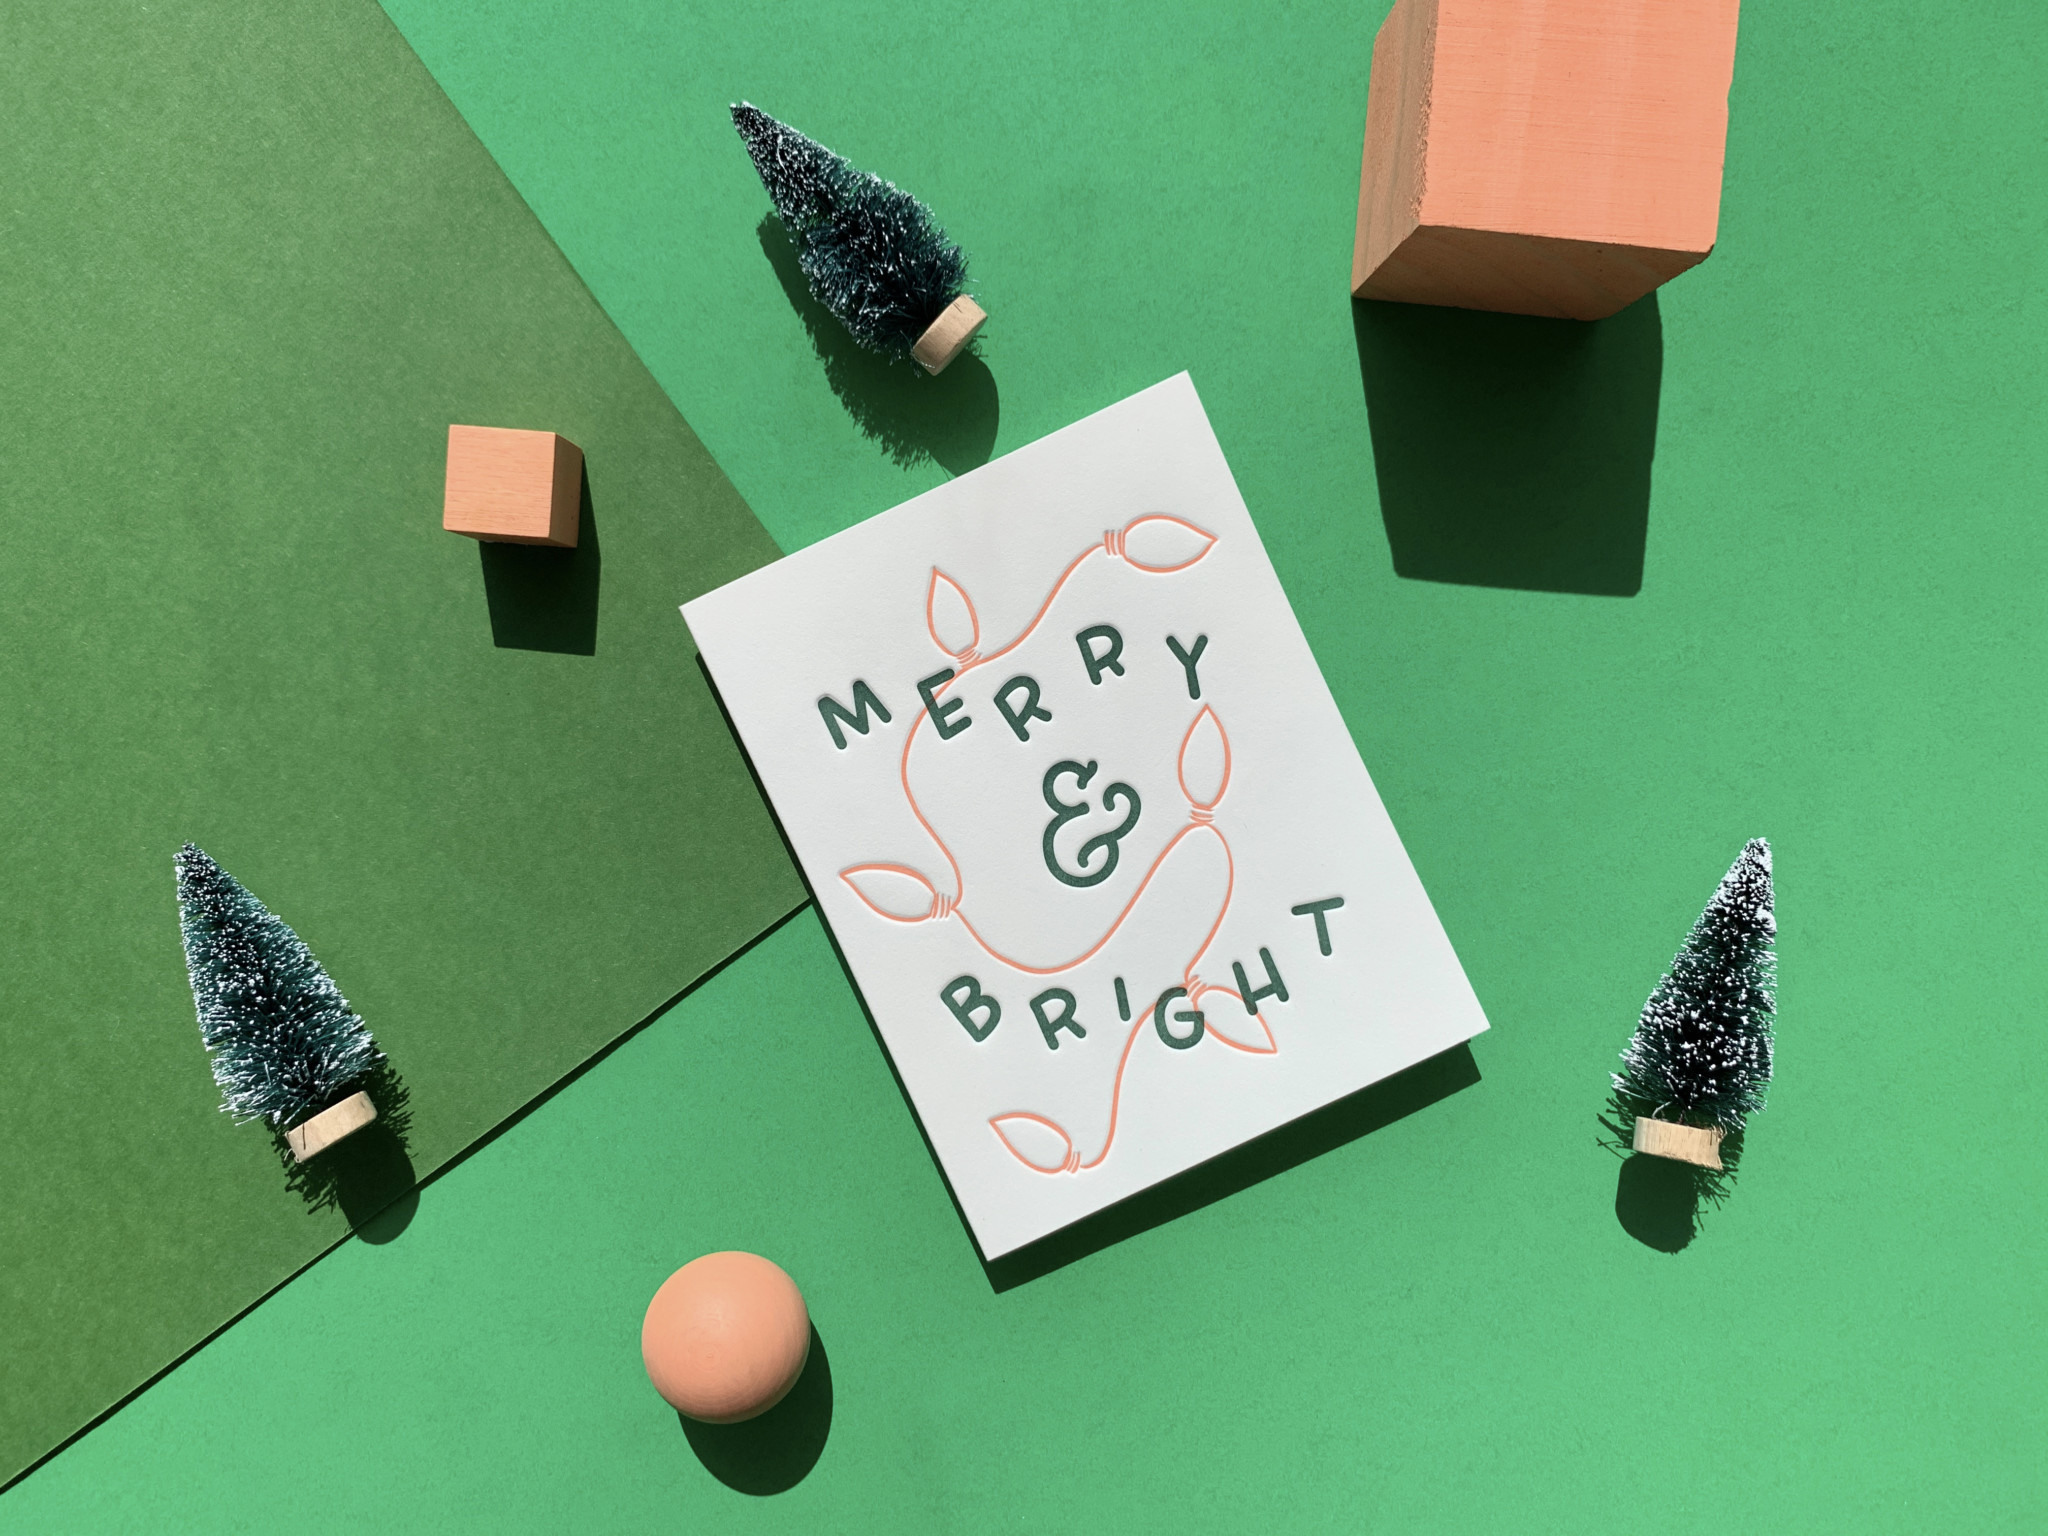 Greeting card reads "Merry & Bright" with illustrations of lights. Styled with holiday objects on a layered paper background.